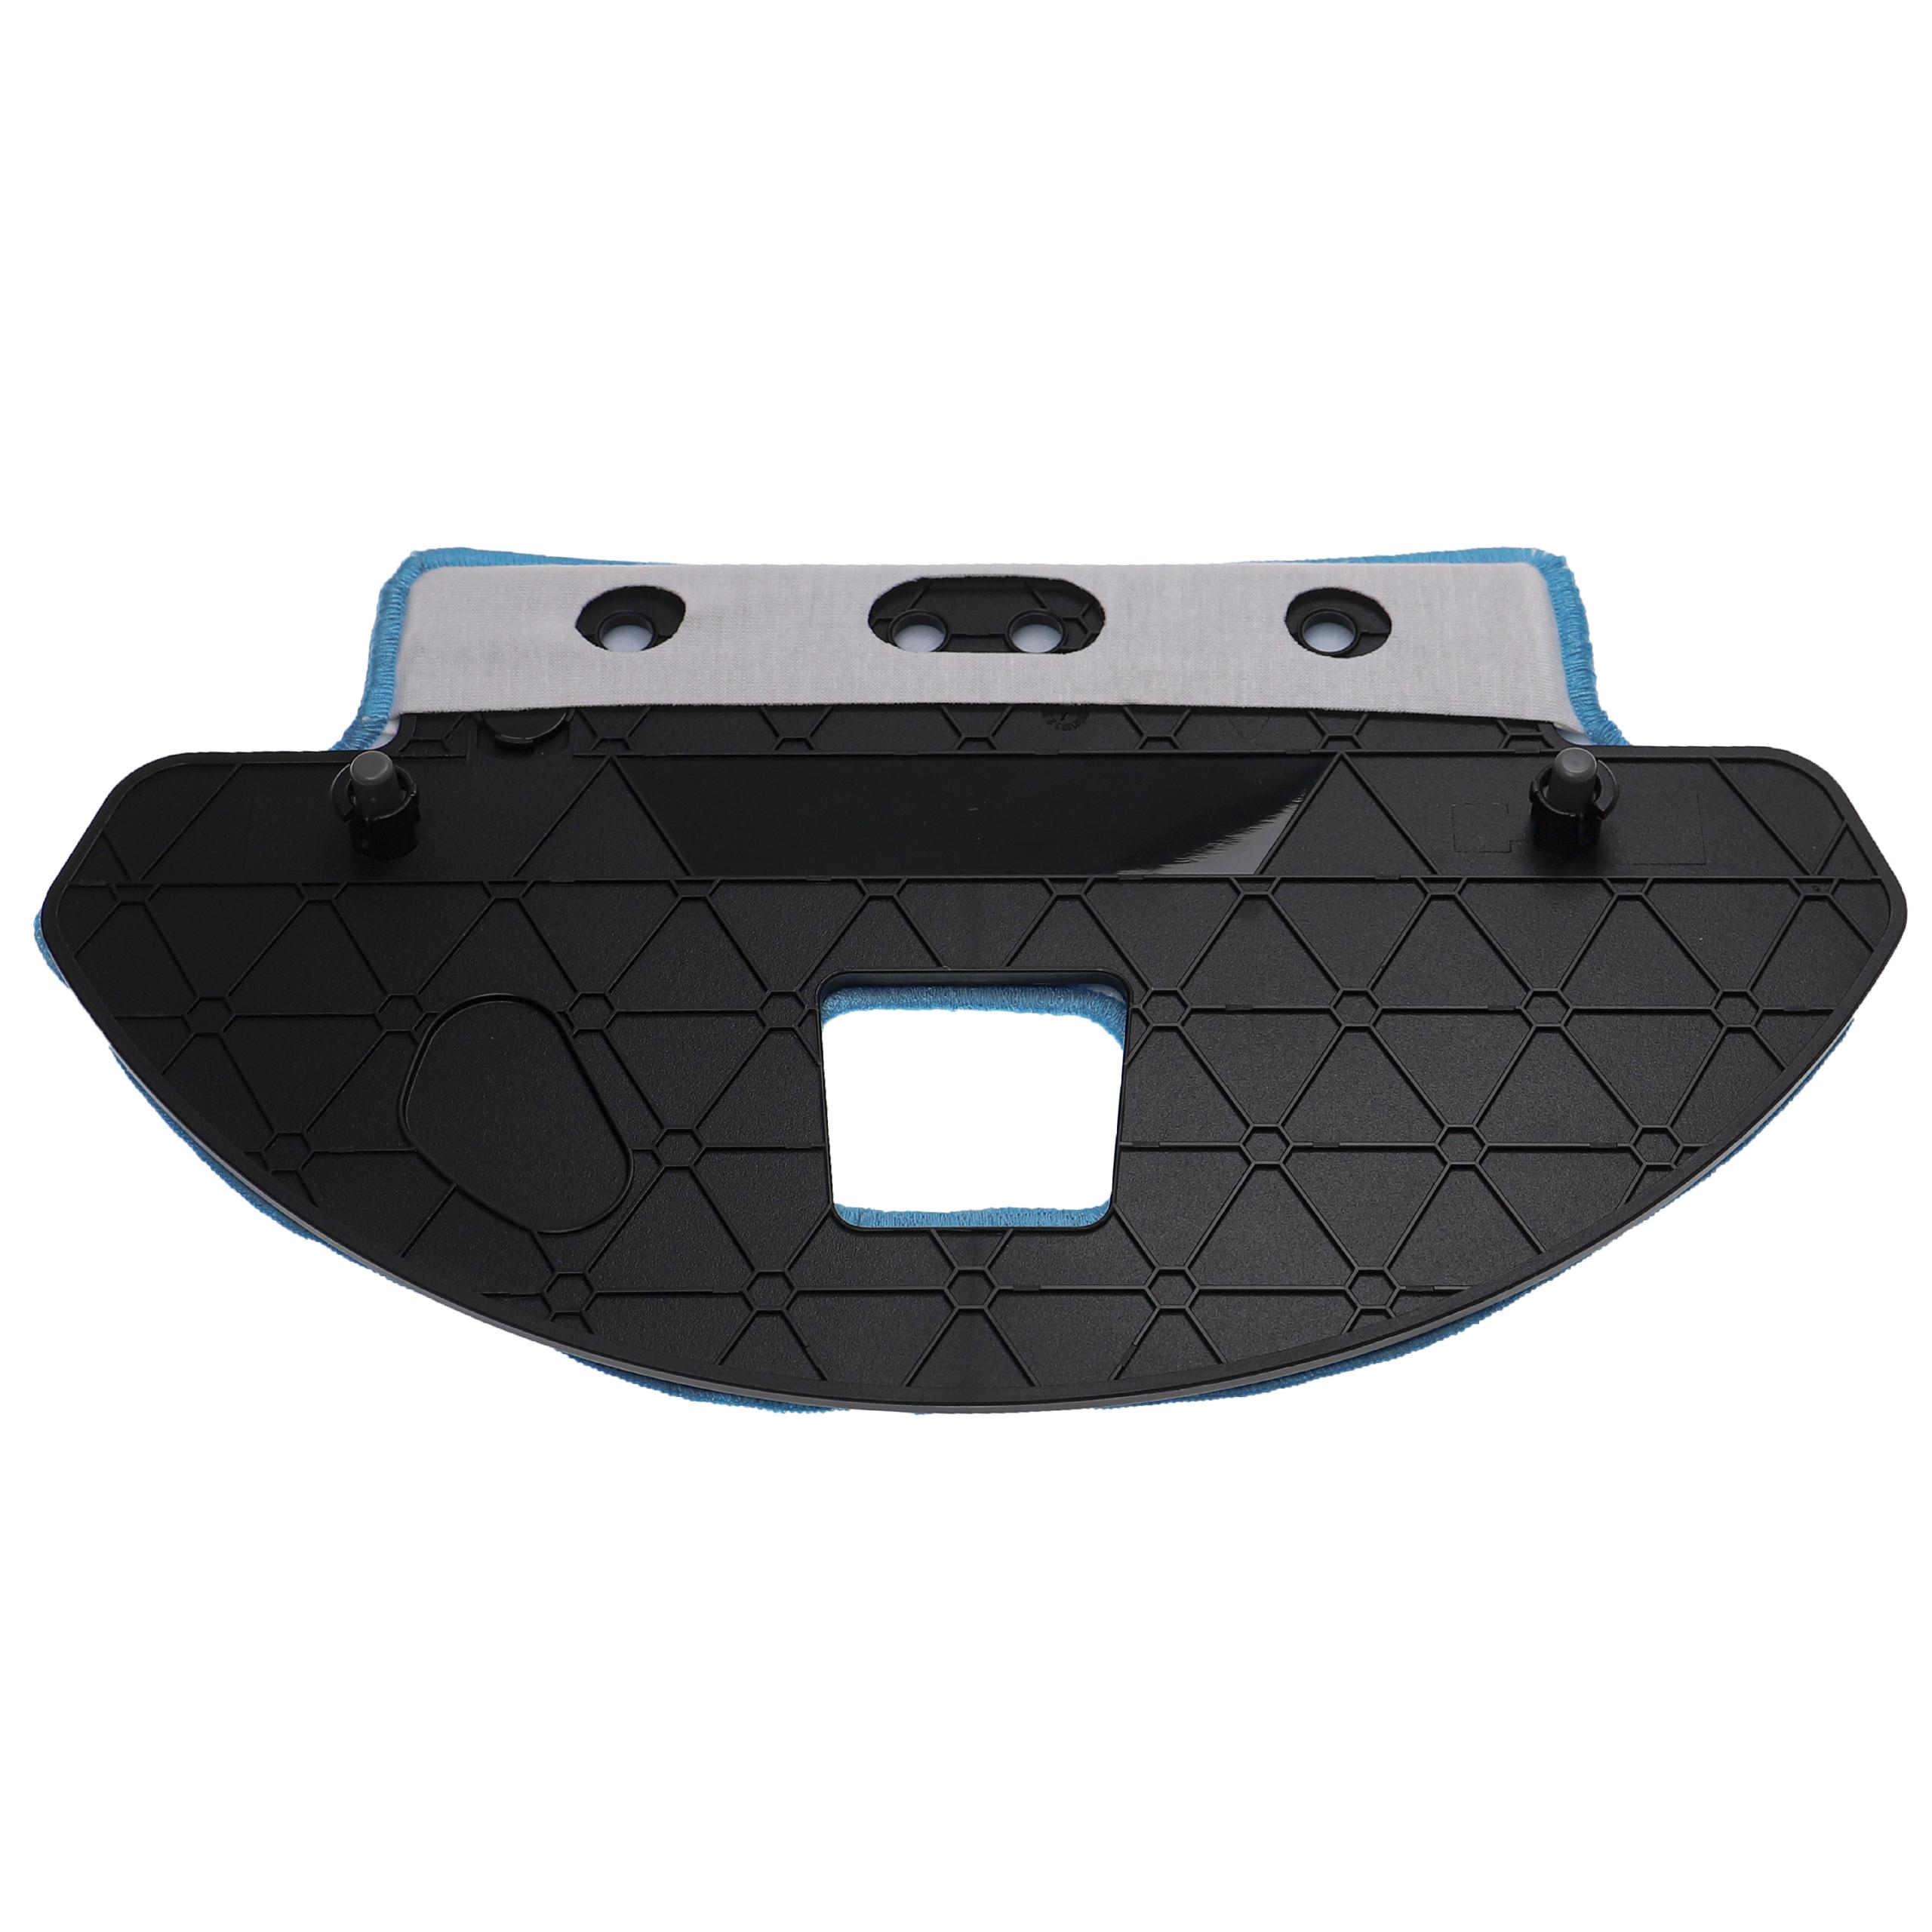 Water Tank Support (incl. Mopping Pad) suitable for Ecovacs Deebot Ozmo 930 Robot Vacuum Cleaner - plastic, bl